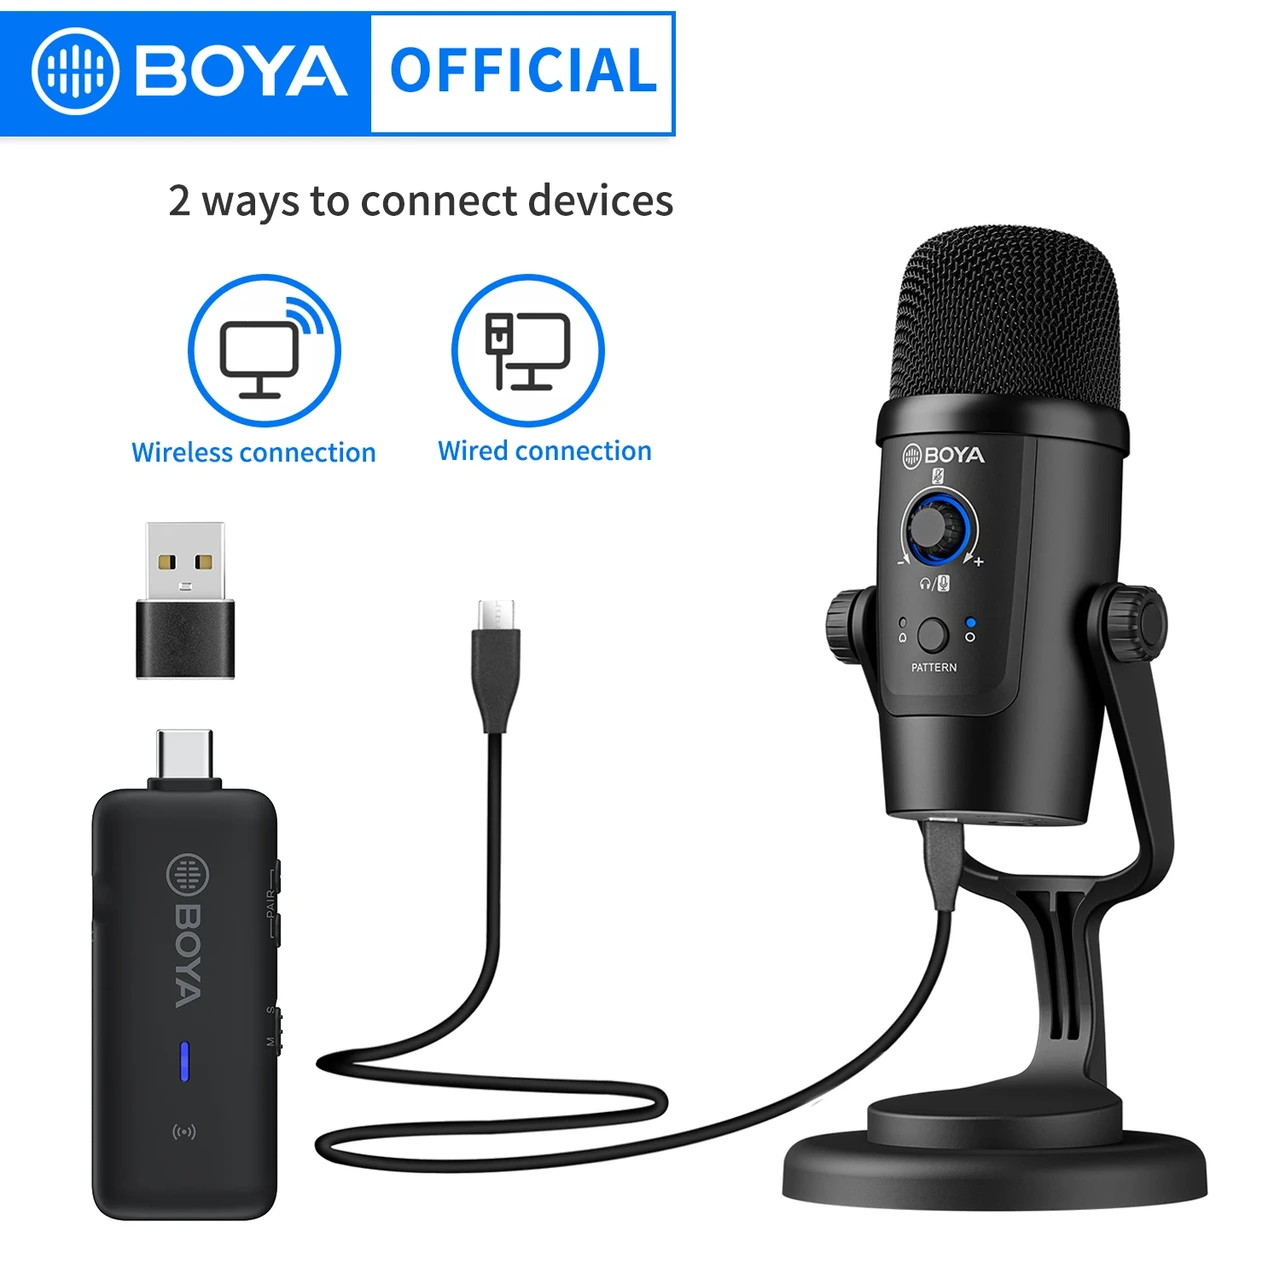 BOYA-USB-Condenser-Wireless-Microphone-BY-PM500W-Professional-Mic-for-PC-Laptop-Streaming-Recording-Vocals-Voice